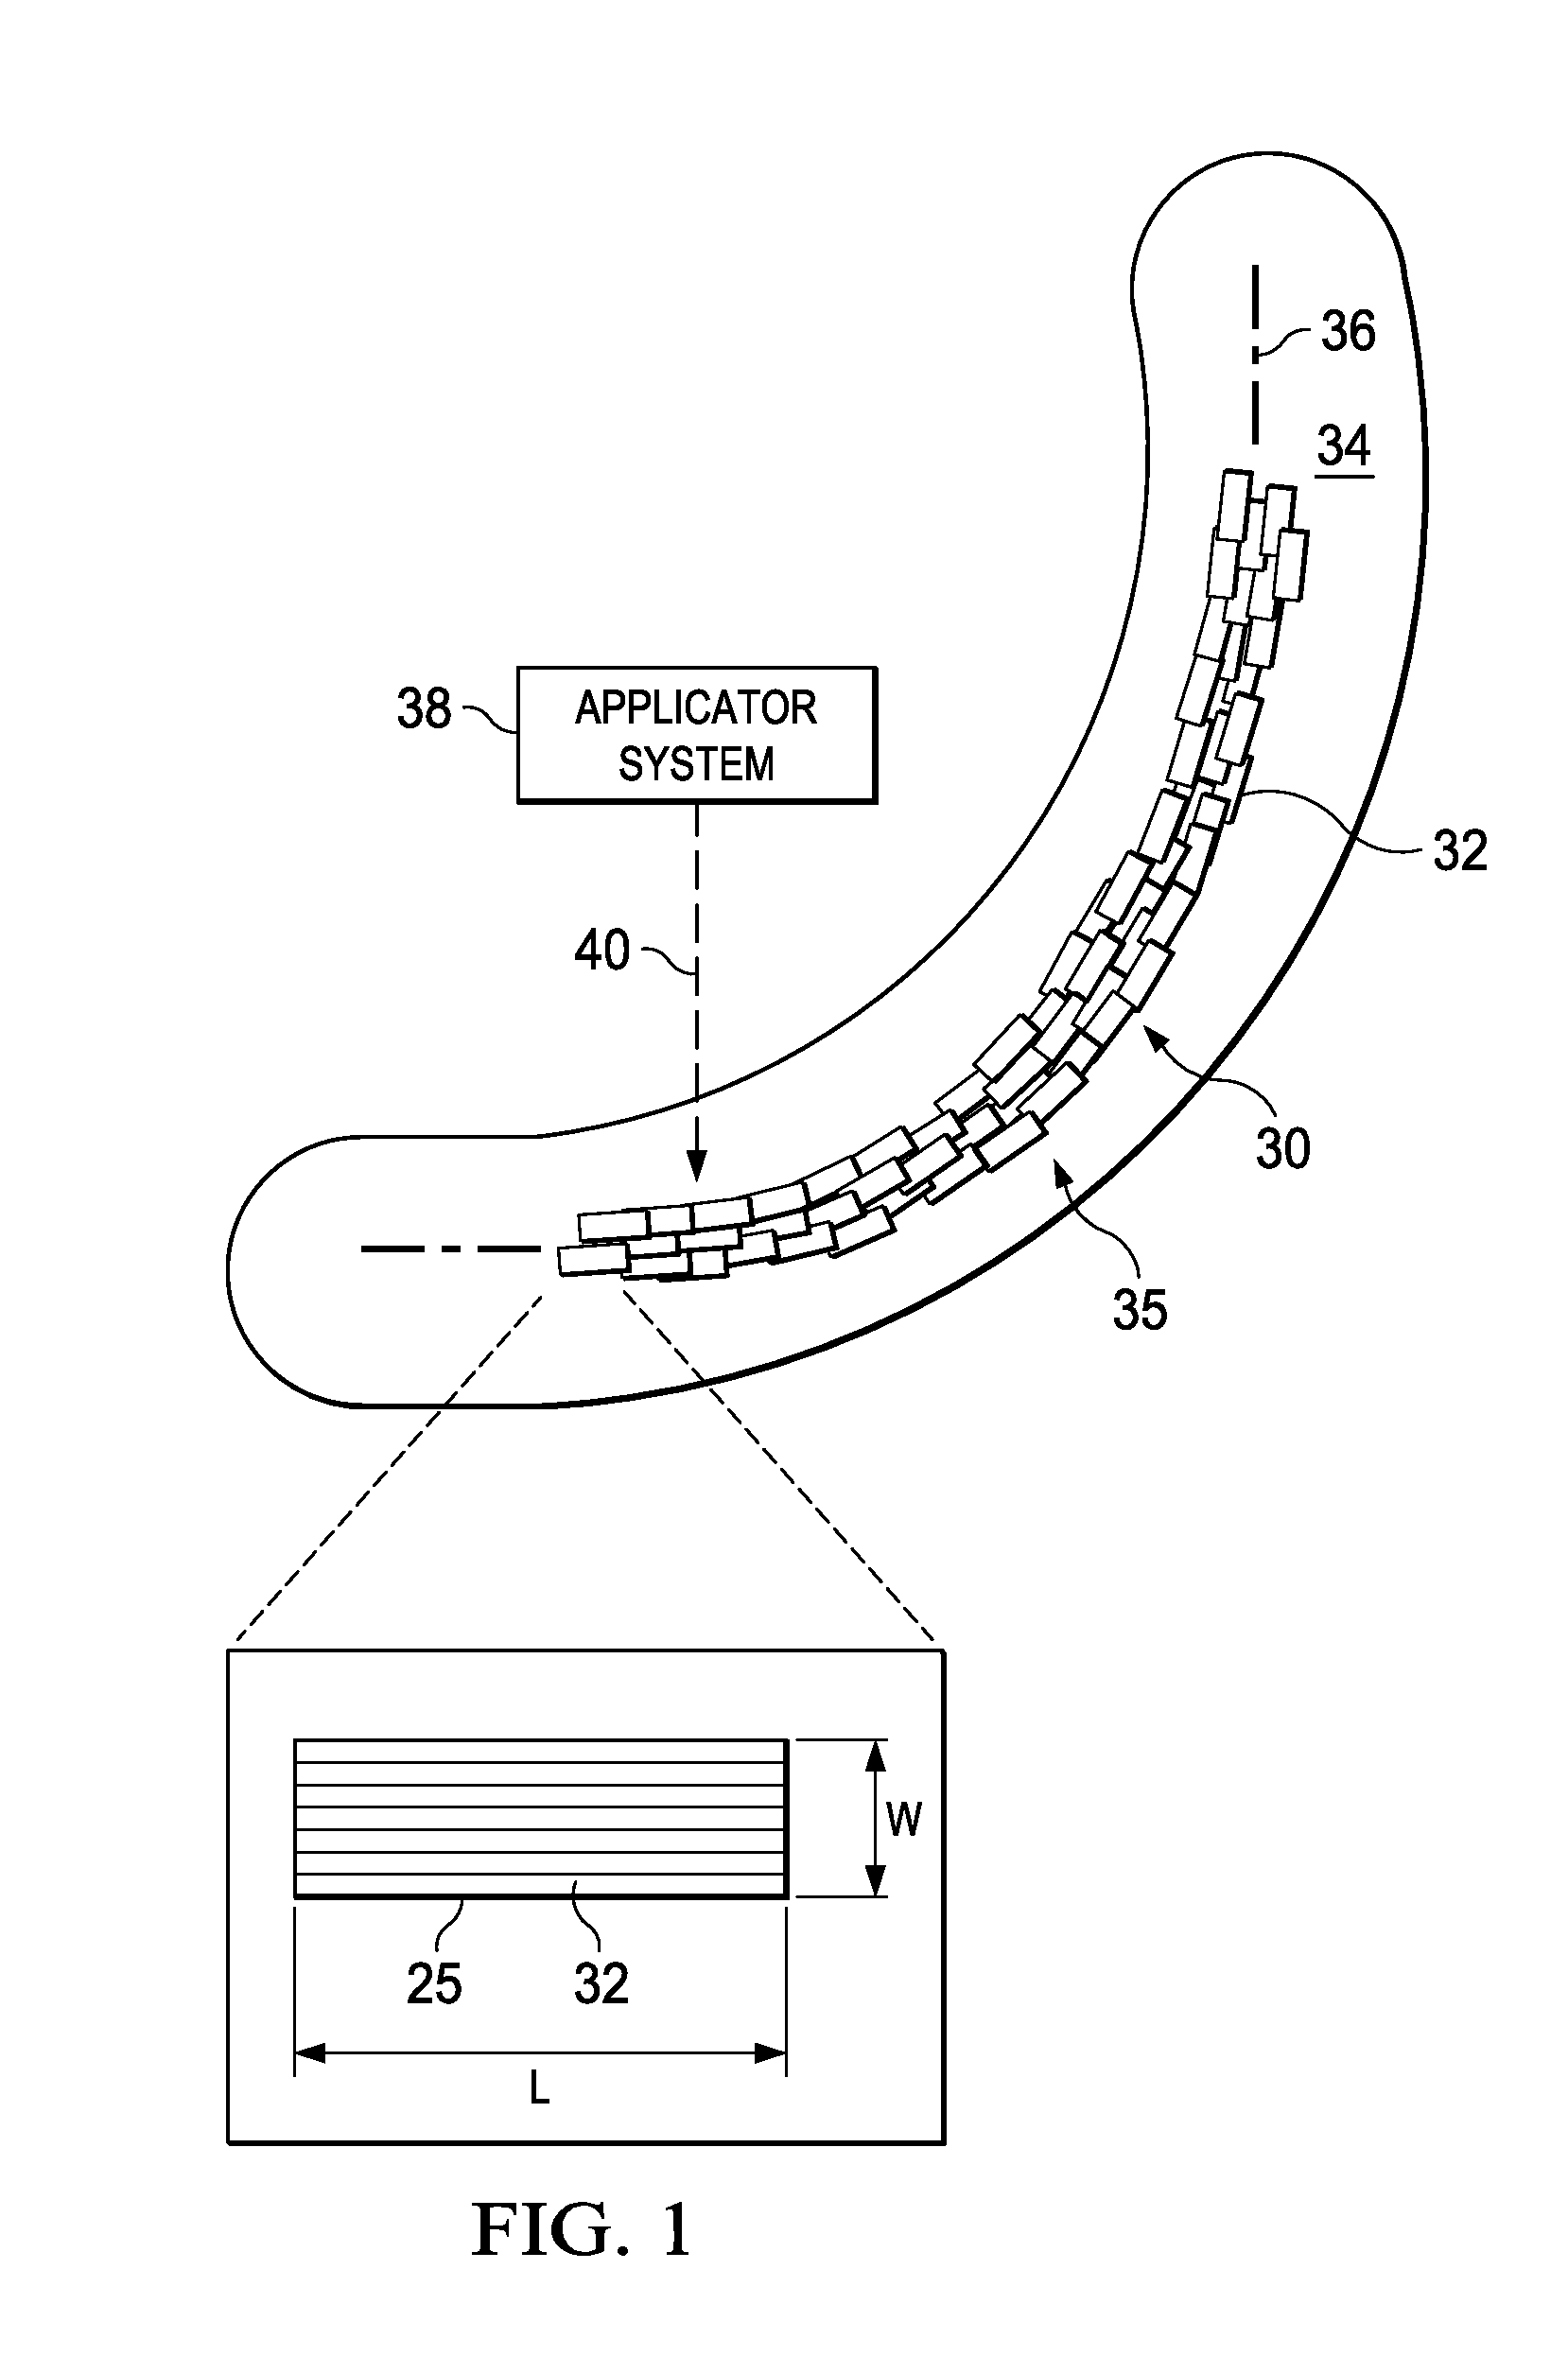 Forming Composite Features Using Steered Discontinuous Fiber Pre-Preg